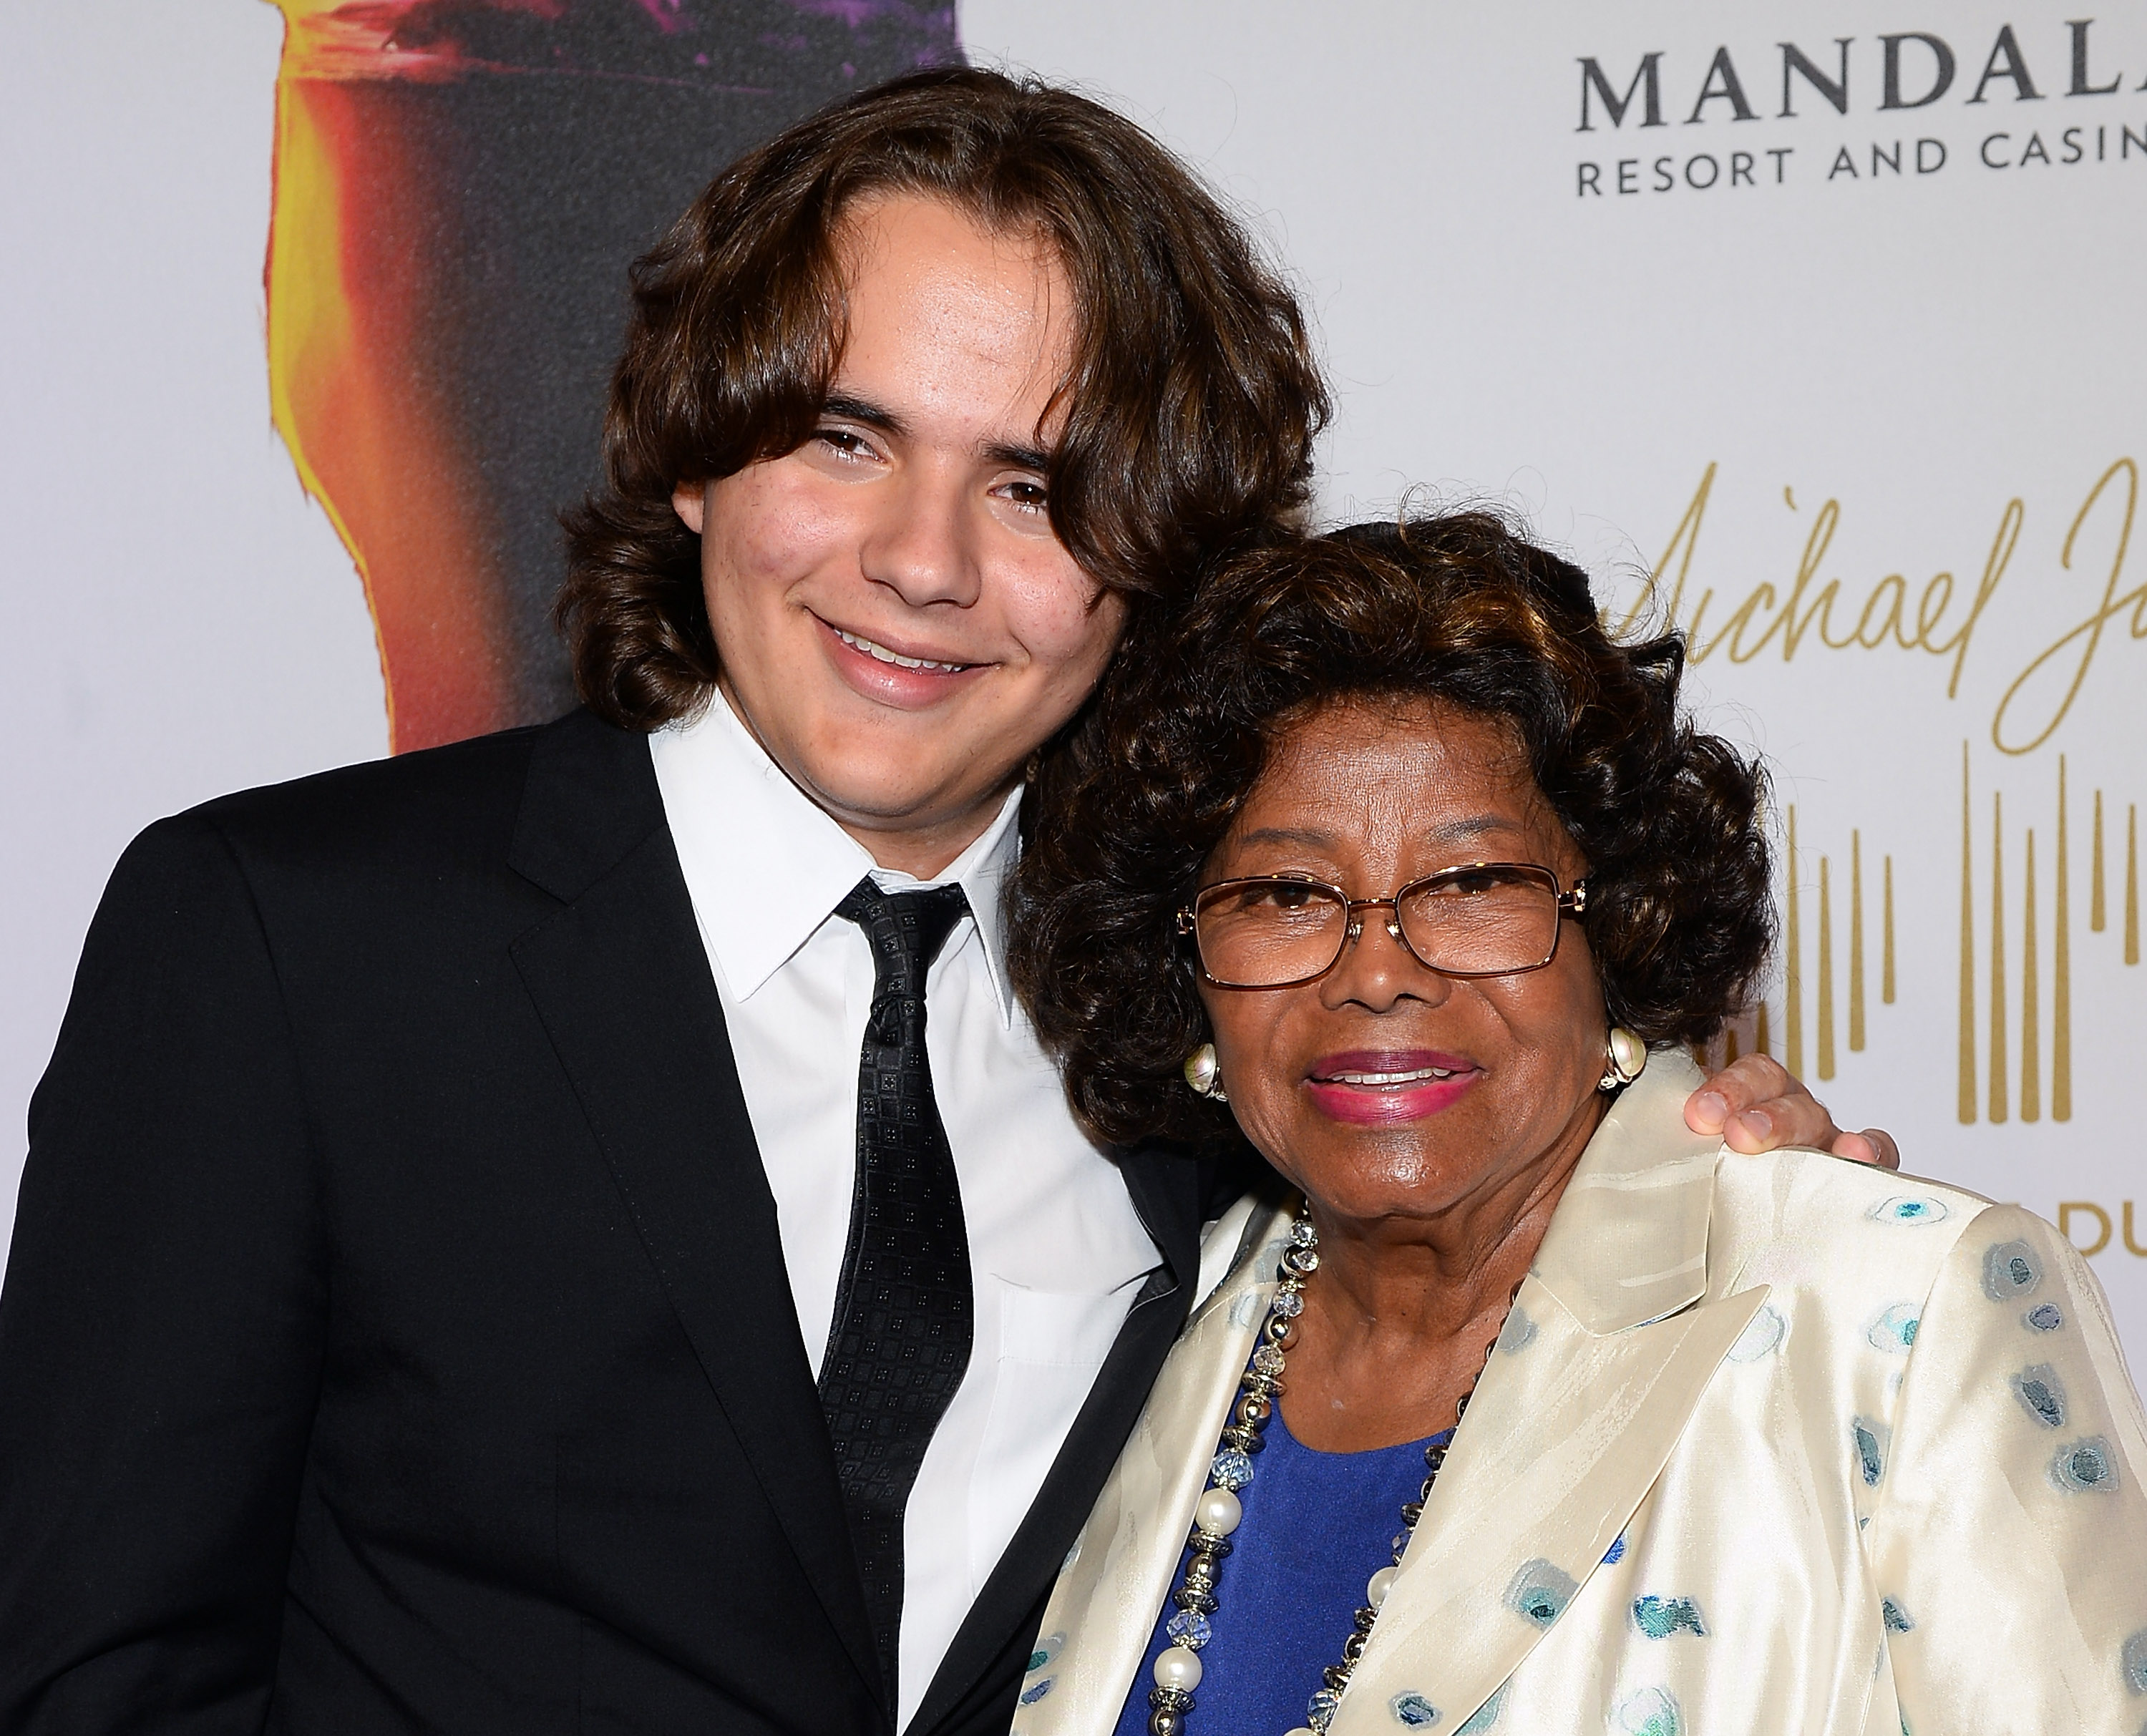 Prince Michael and Katherine Jackson at the world premiere of "Michael Jackson ONE by Cirque du Soleil" on June 29, 2013 in Las Vegas, Nevada | Source: Getty Images